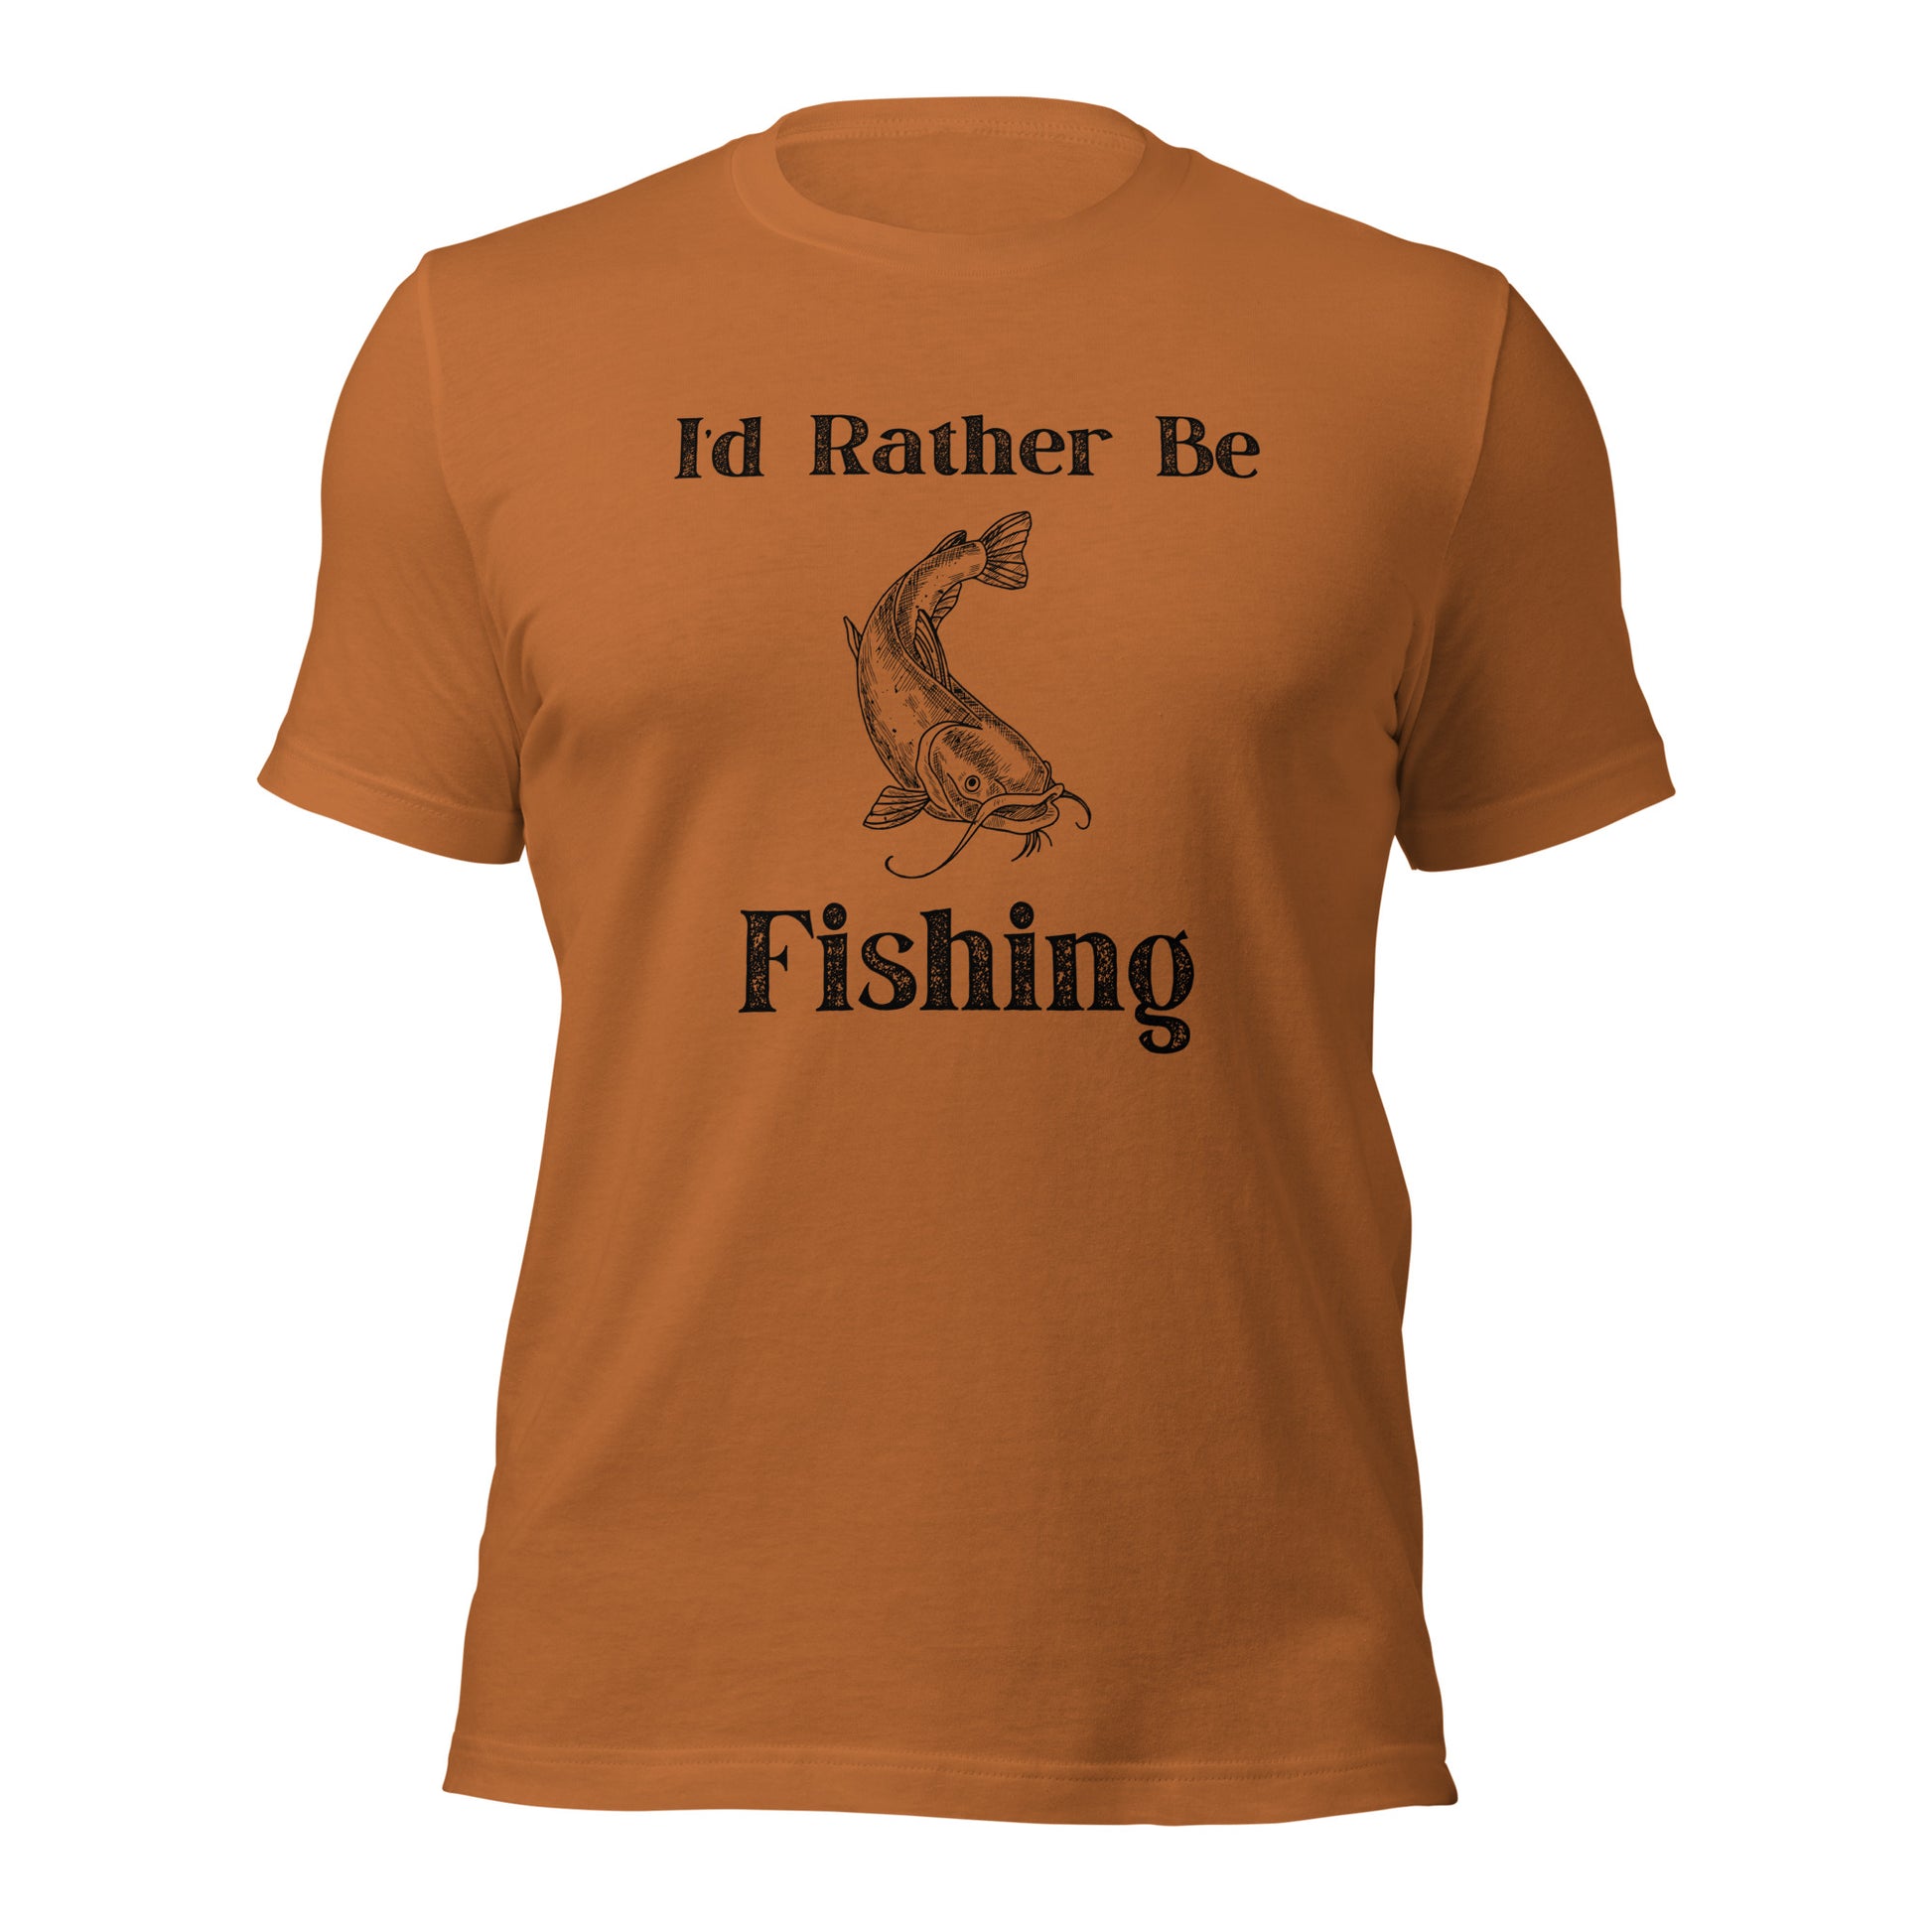 Comfortable fishing-themed t-shirt in high-quality cotton.